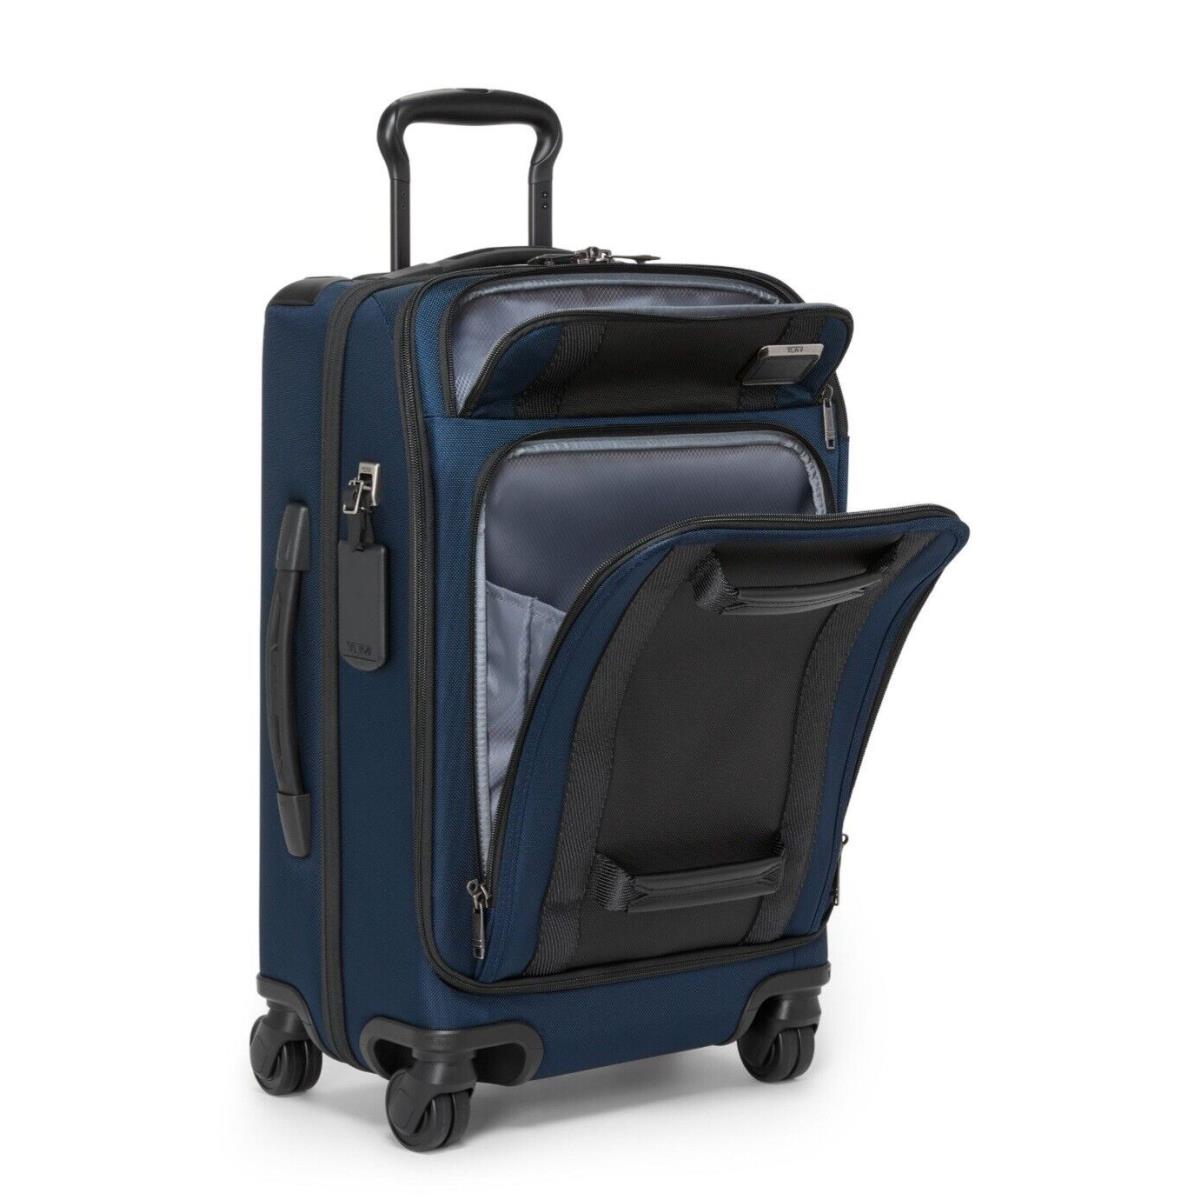 Tumi Merge Exclusive International Front-lid 4 Wheeled Carry-on in Navy